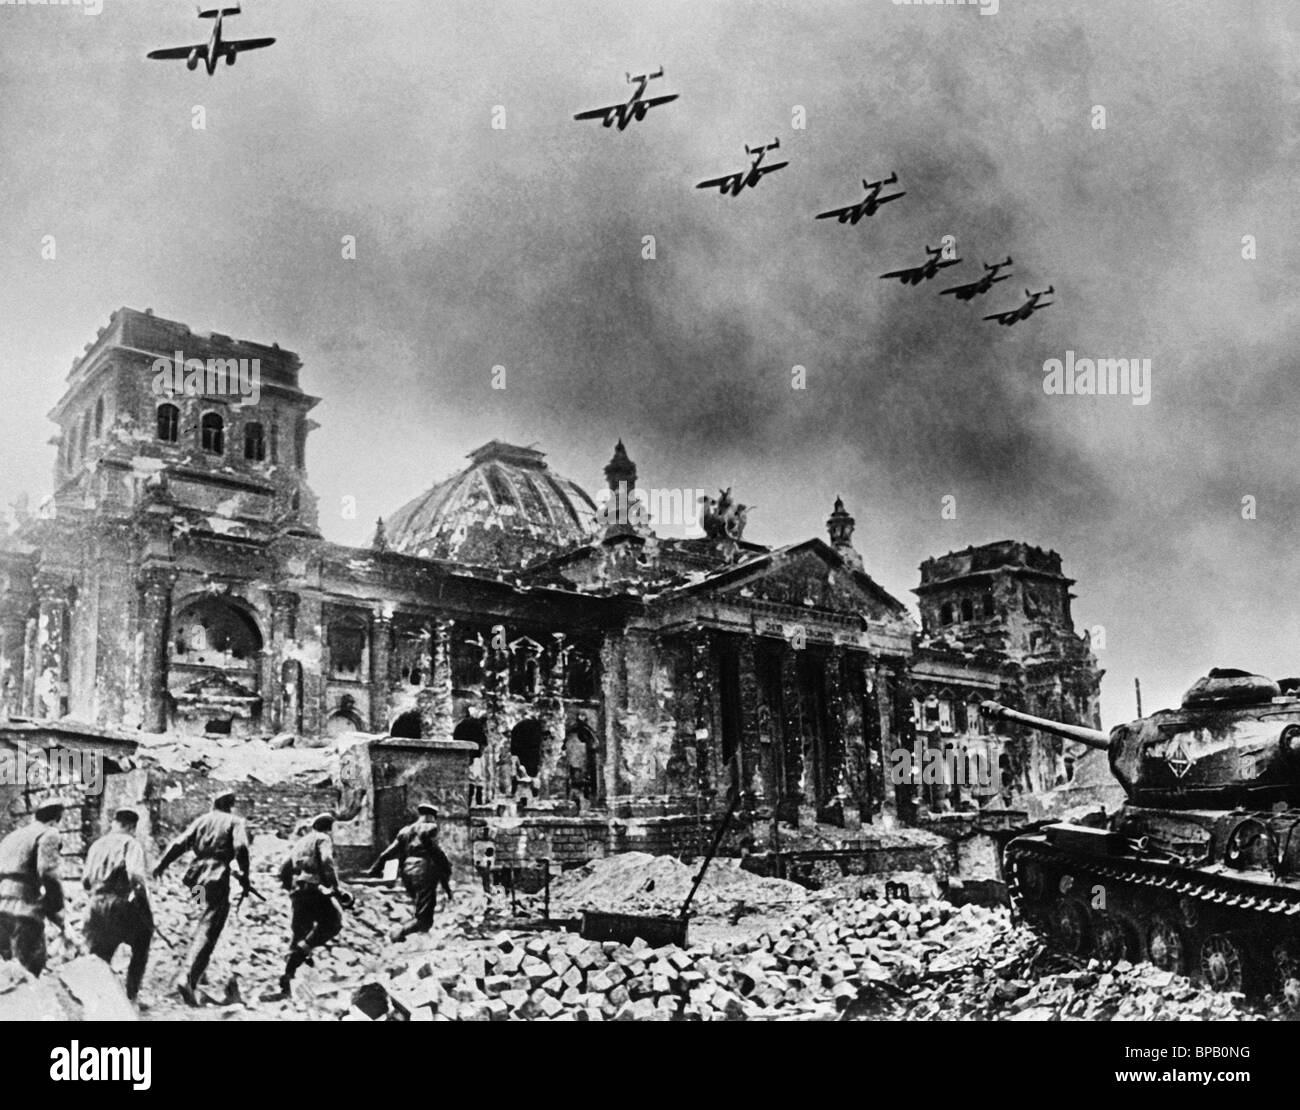 battle-for-reichstag-1945-BPB0NG.jpg